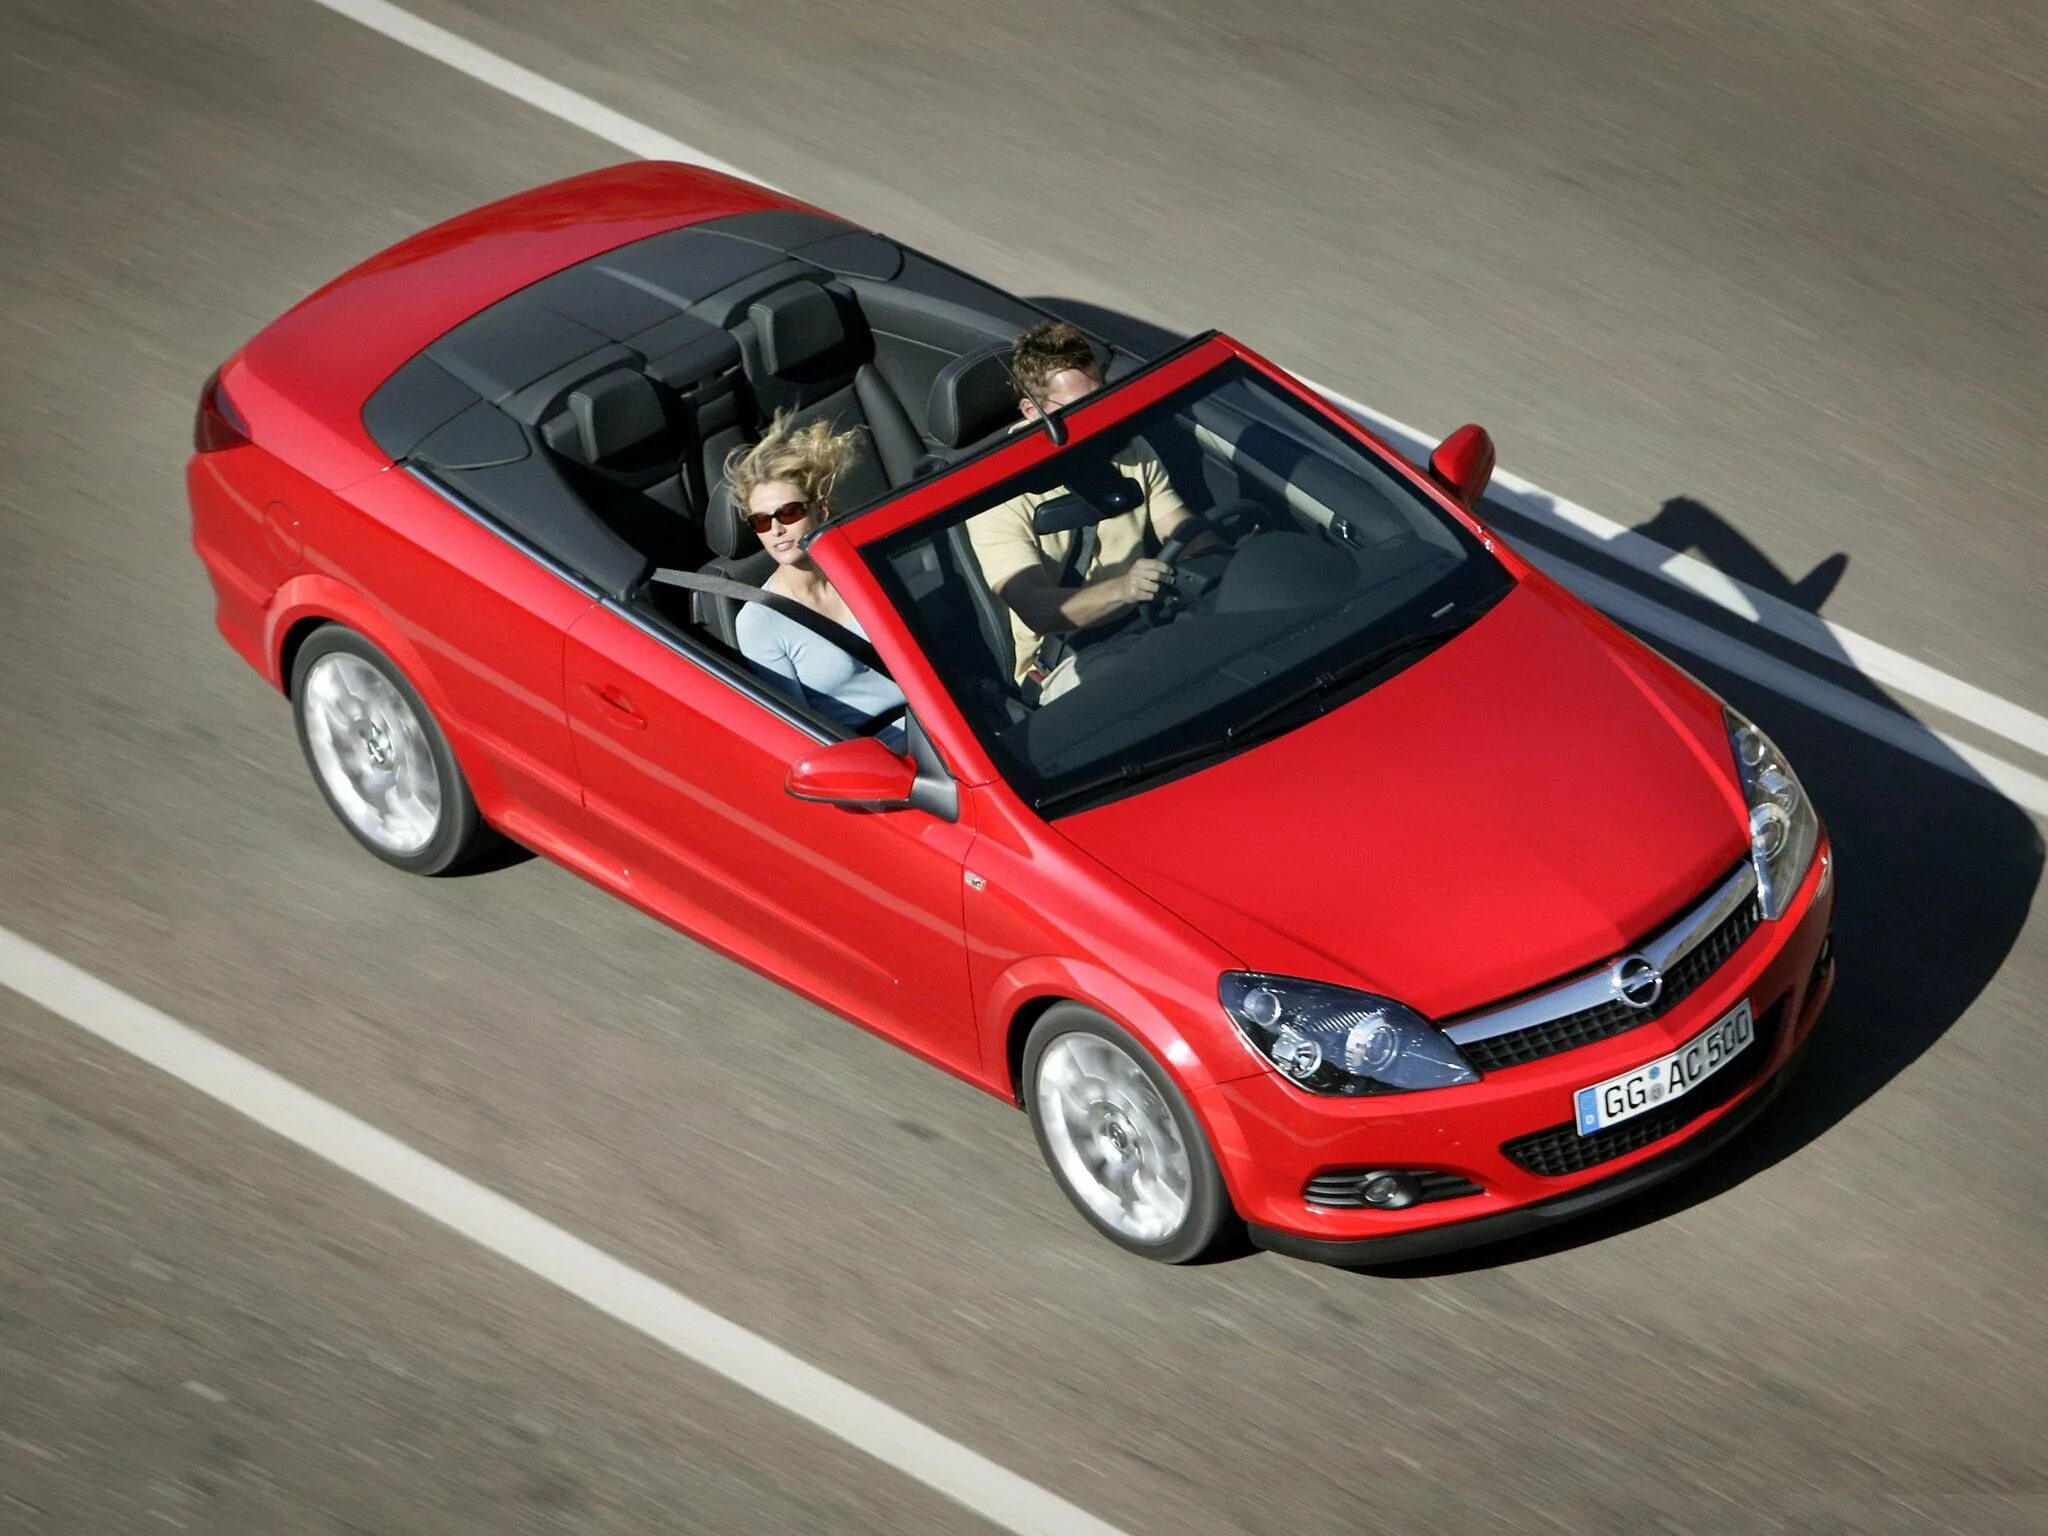 Opel Astra Cabriolet. Opel Astra TWINTOP кабриолет. Opel Astra h кабриолет.